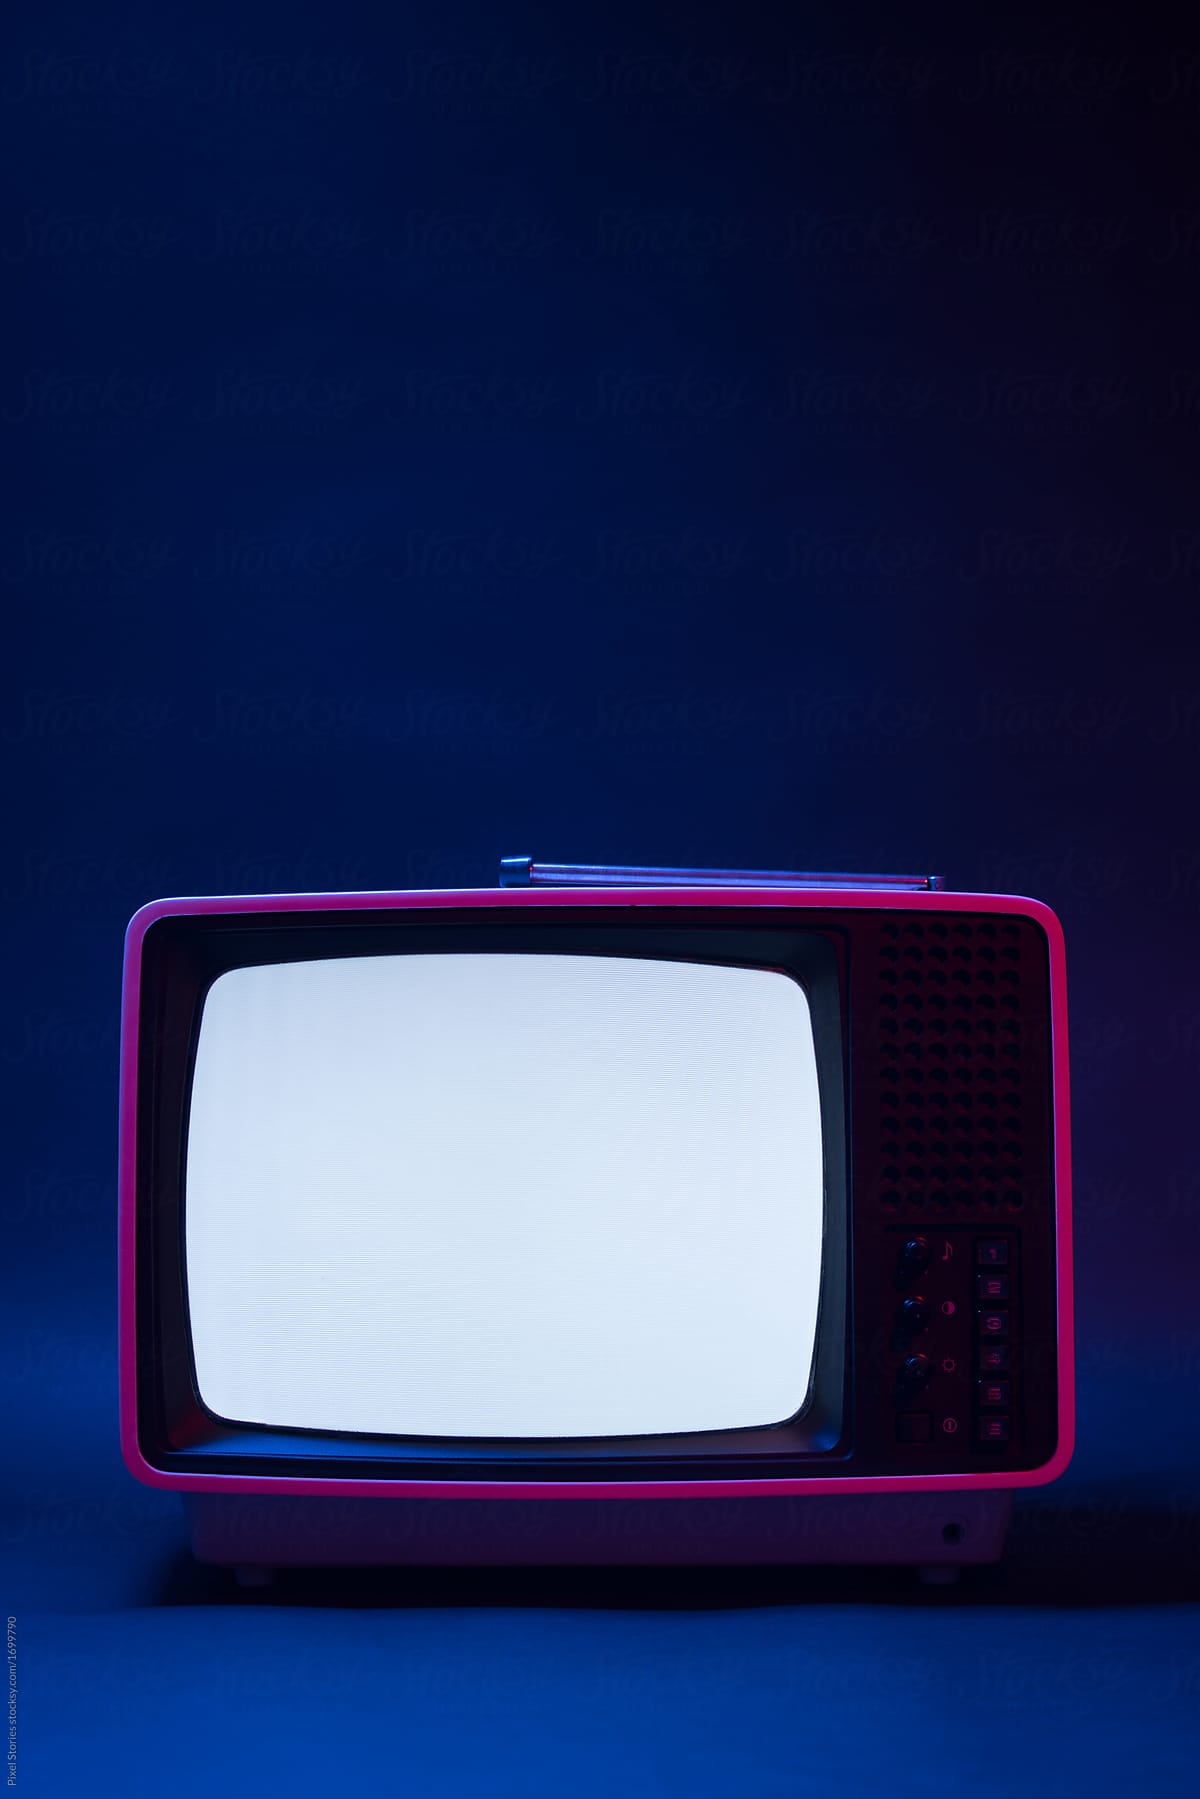 Old analog TV displaying noise under blue and red light